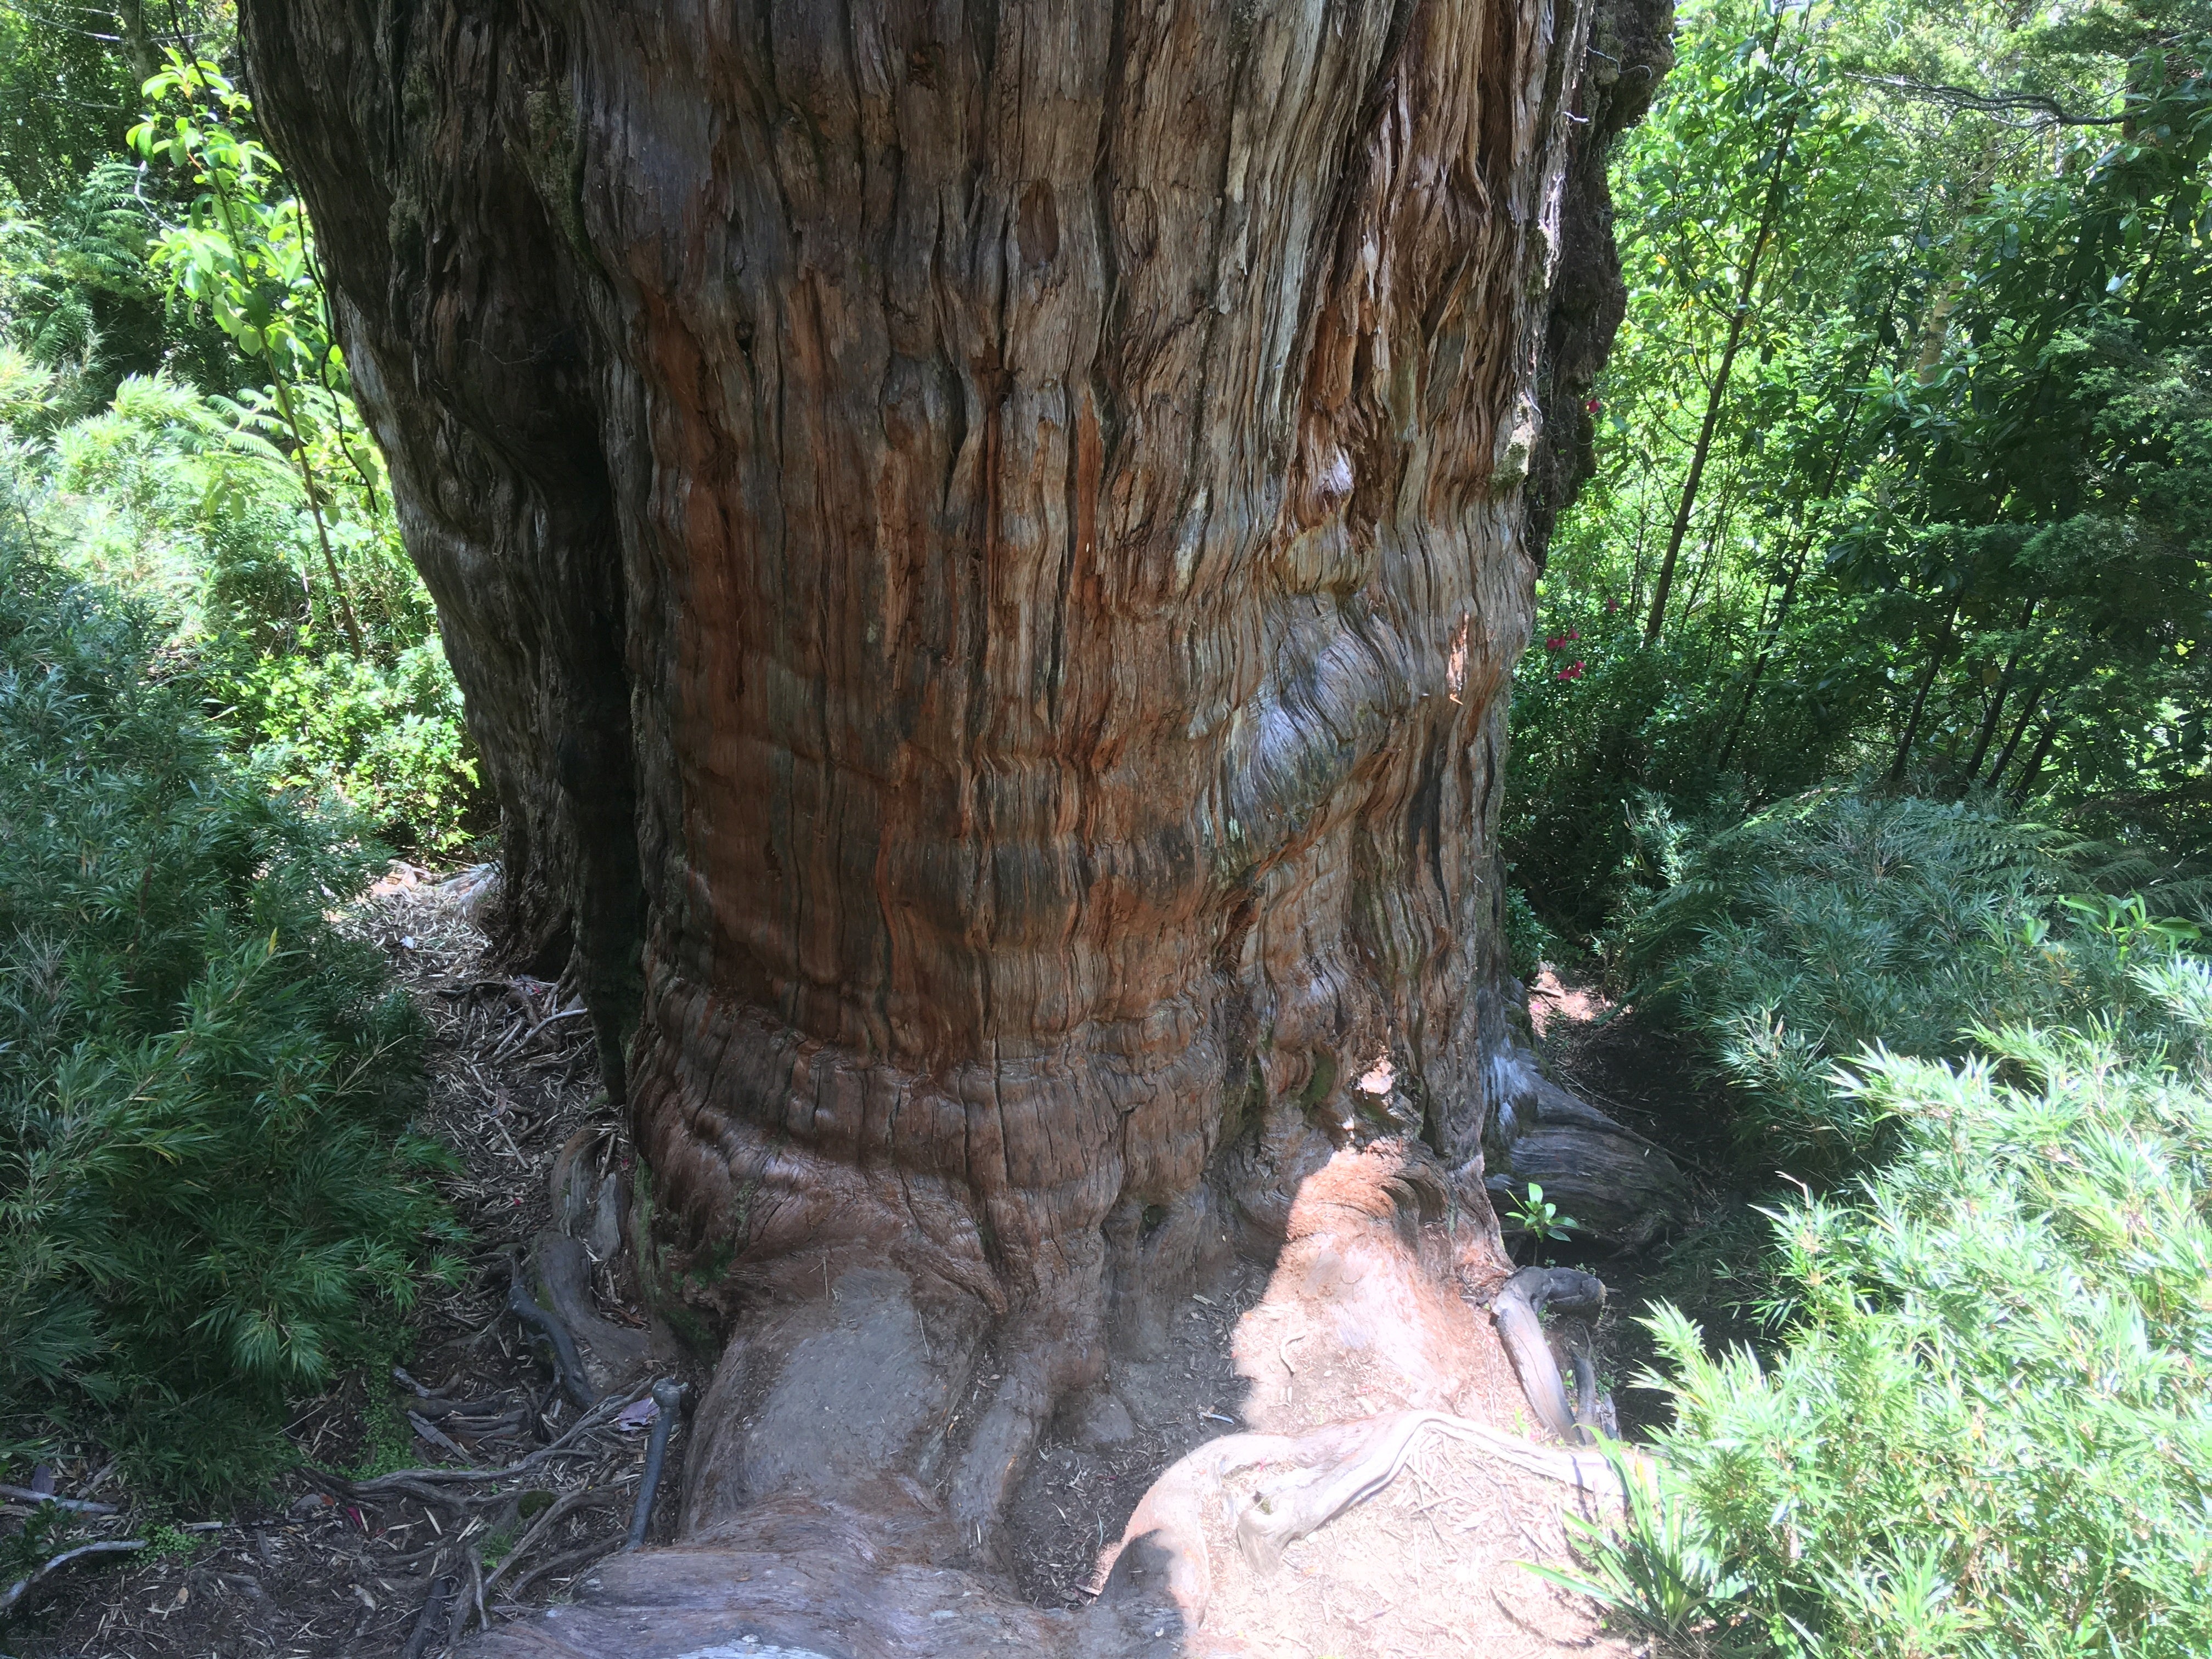 The great grandfather’s age beats the current record-holder of a bristlecone pine tree aged 4,853 years residing in California